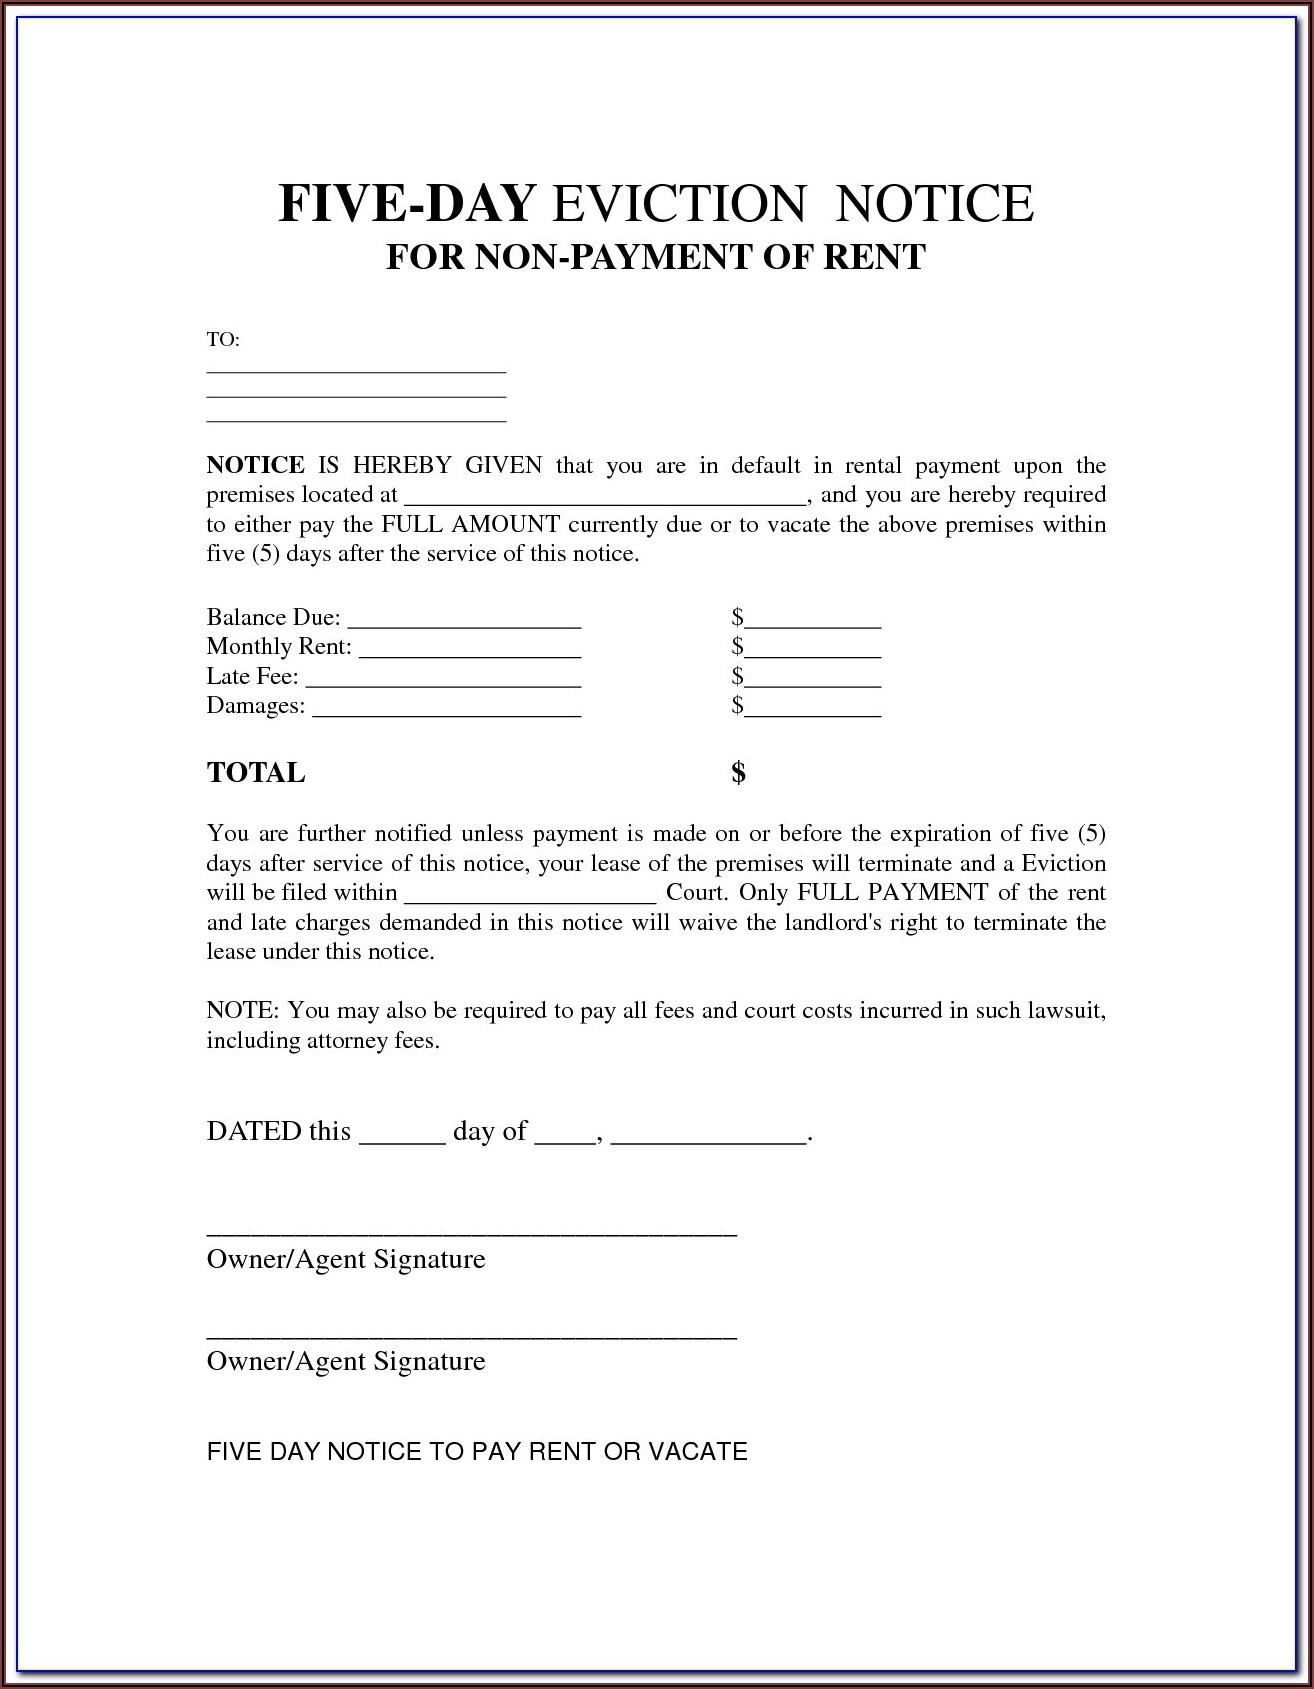 Wisconsin 5 Day Eviction Notice Form